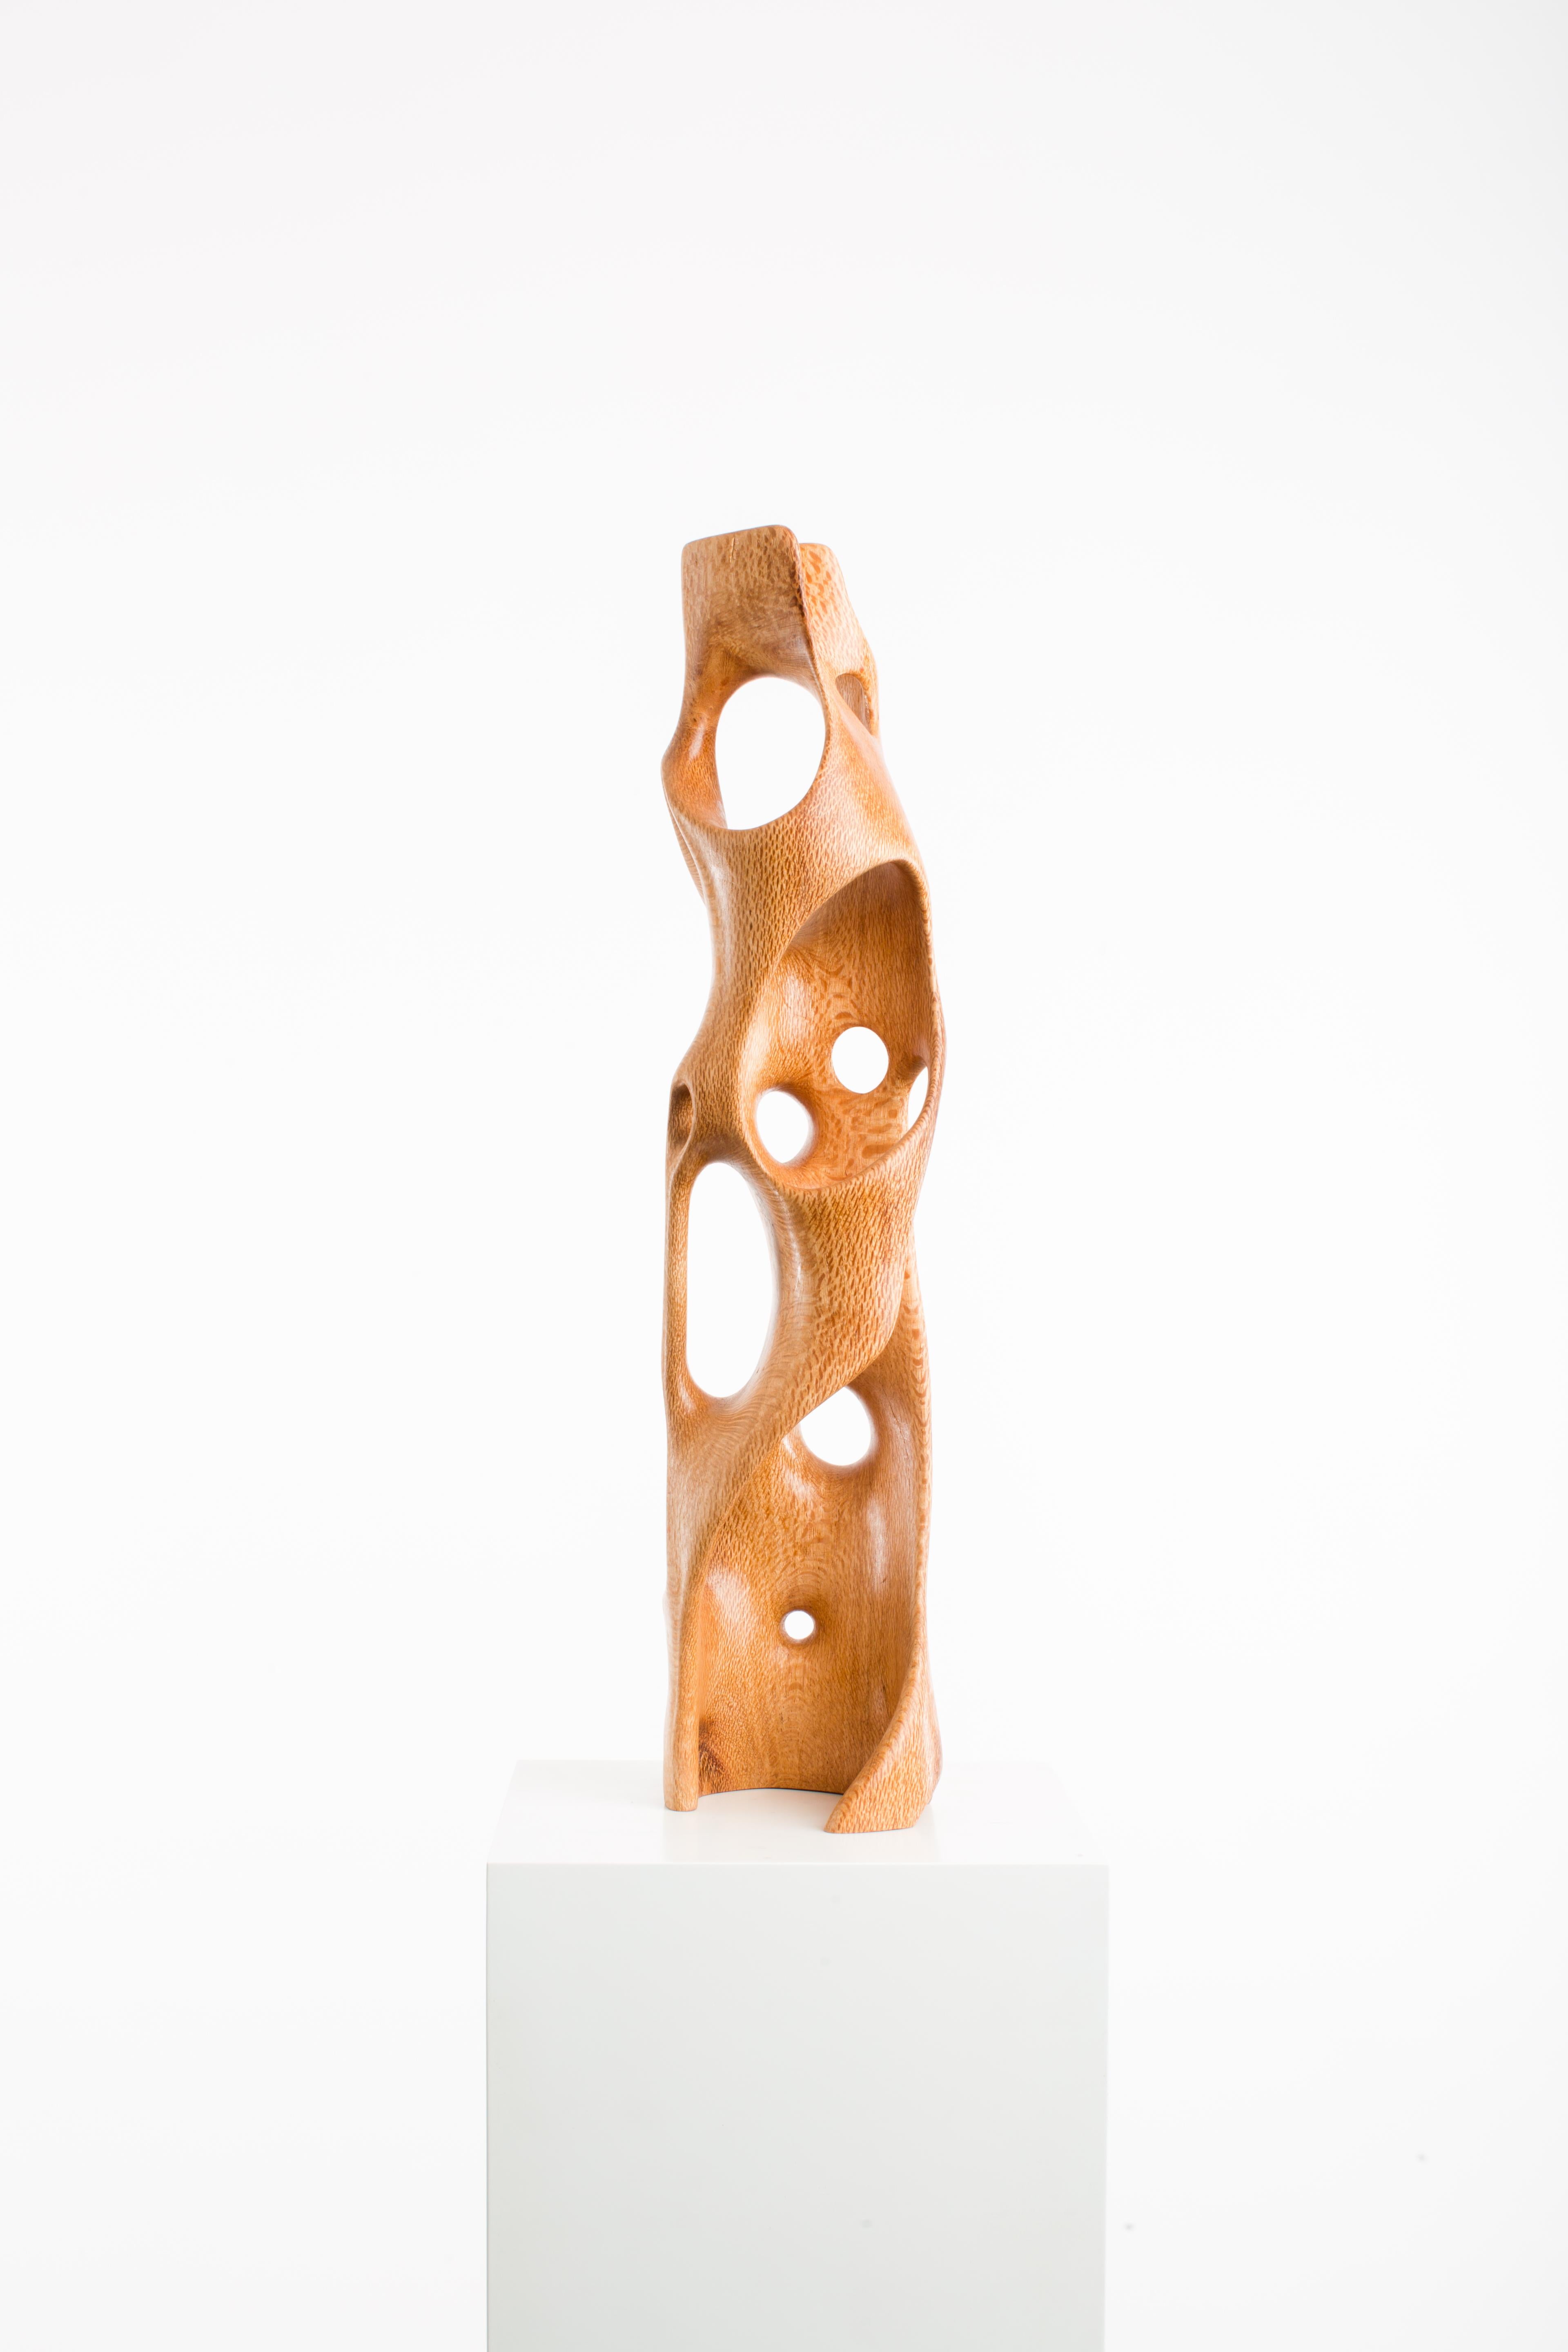 Raw, Wood, Satin, Abstract, Contemporary, Modern, Sculpture